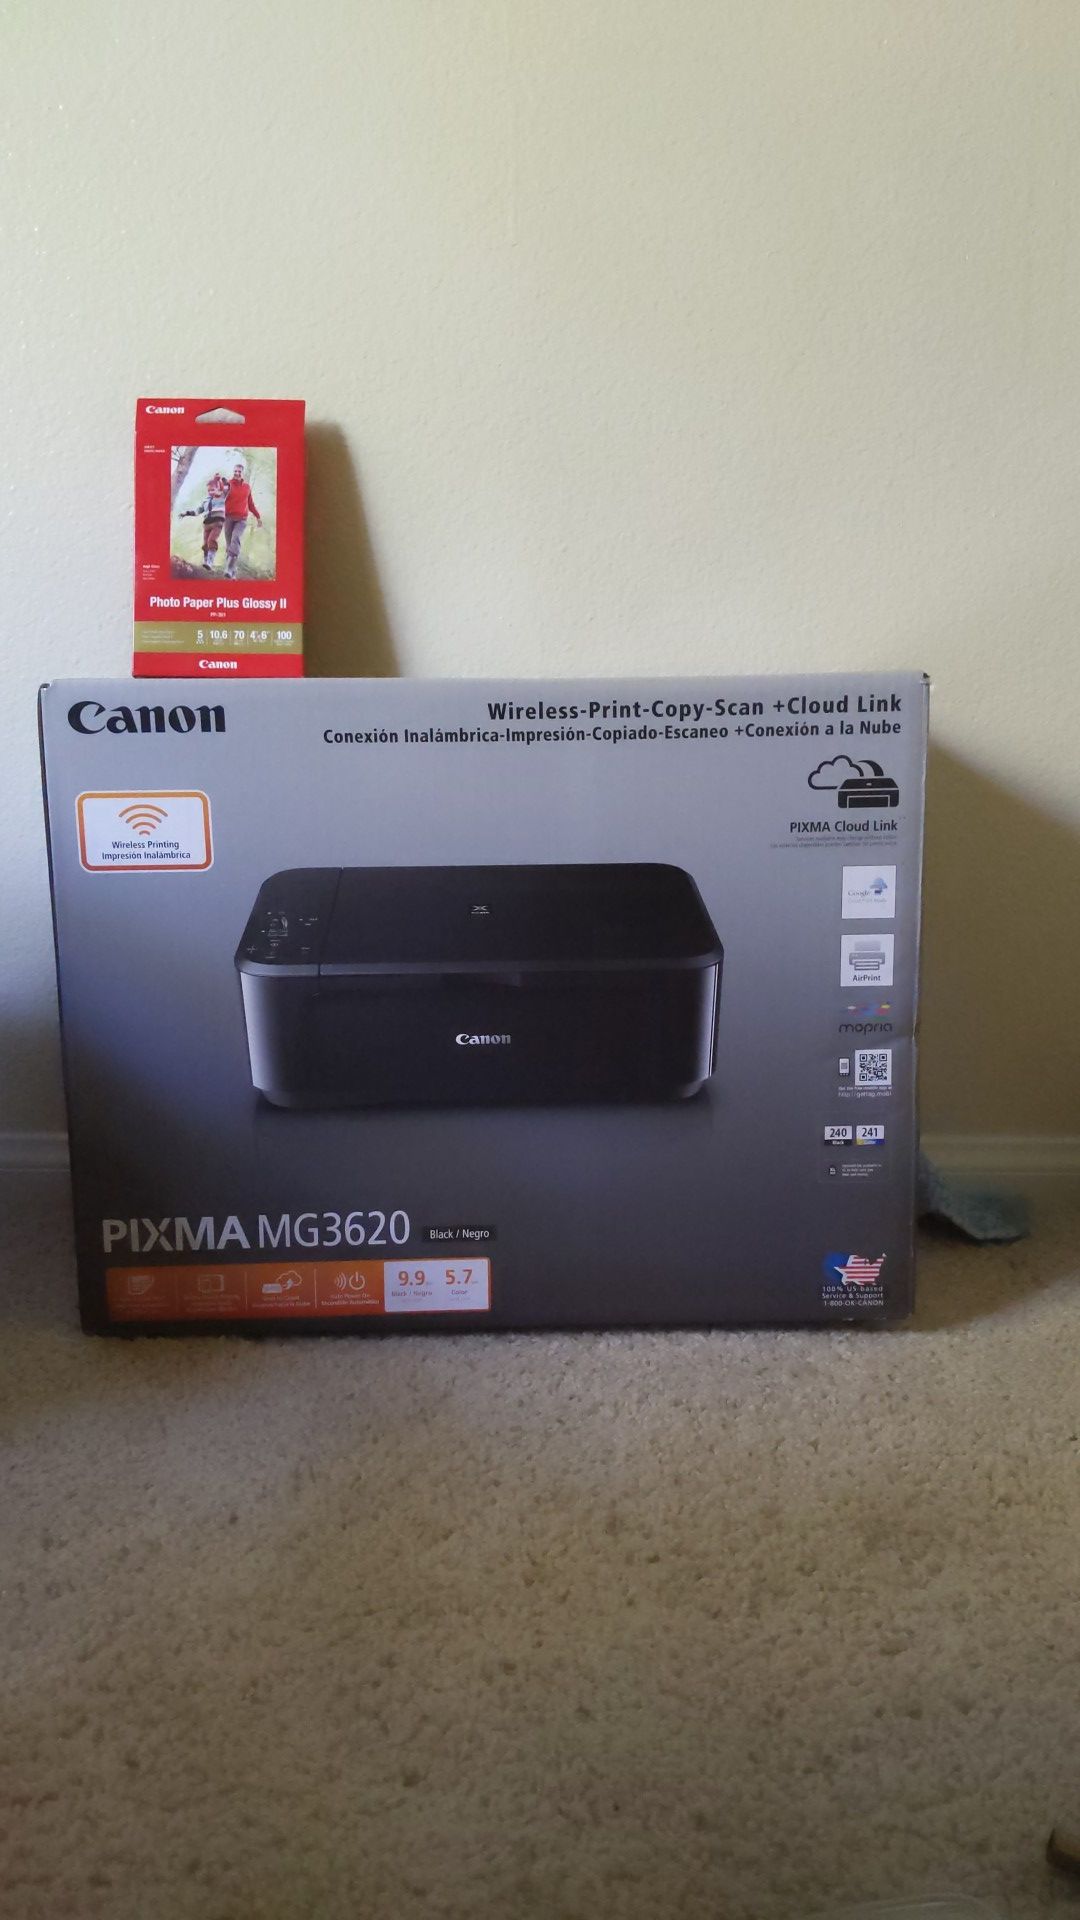 New Canon Wireless Print-Copy-Scan + Cloud Link Printer With ink